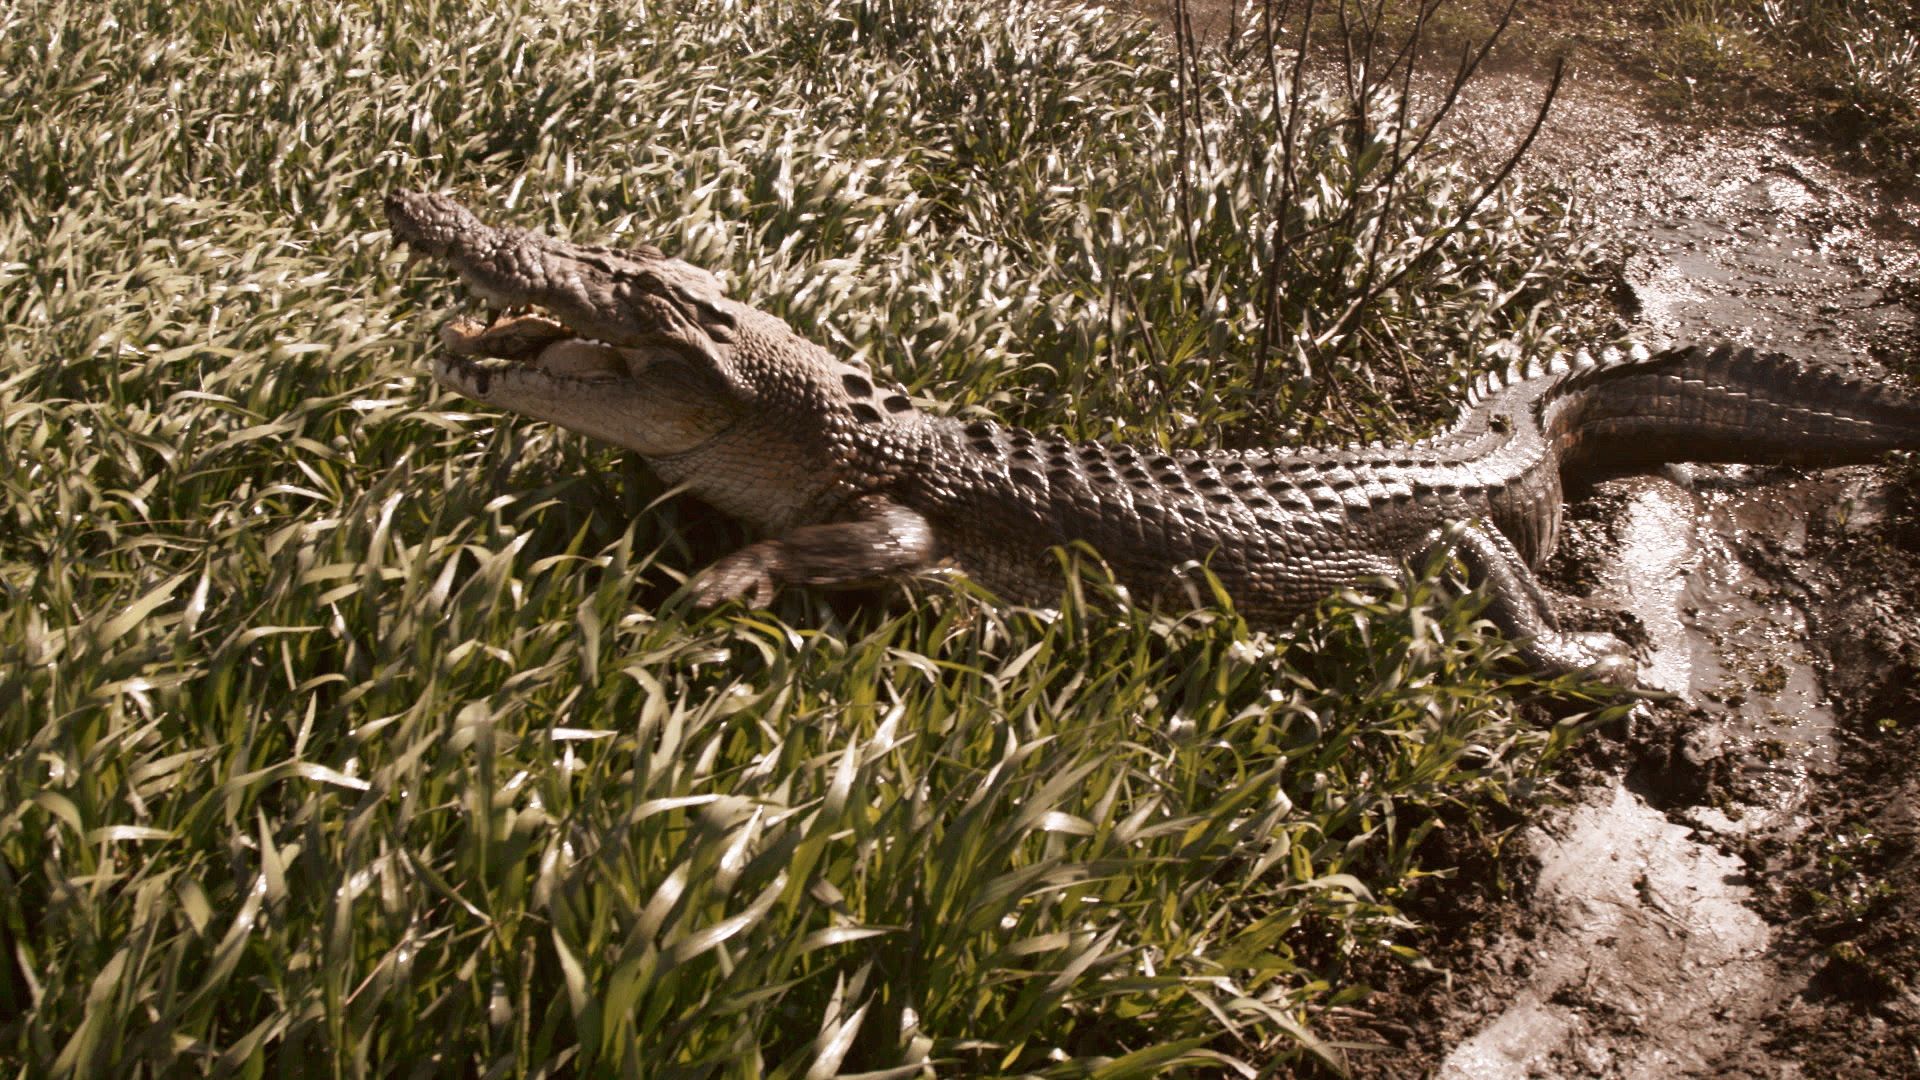 Crocodile in grass, missing half it's bottom jaw. [Photo of the day - October 2021]